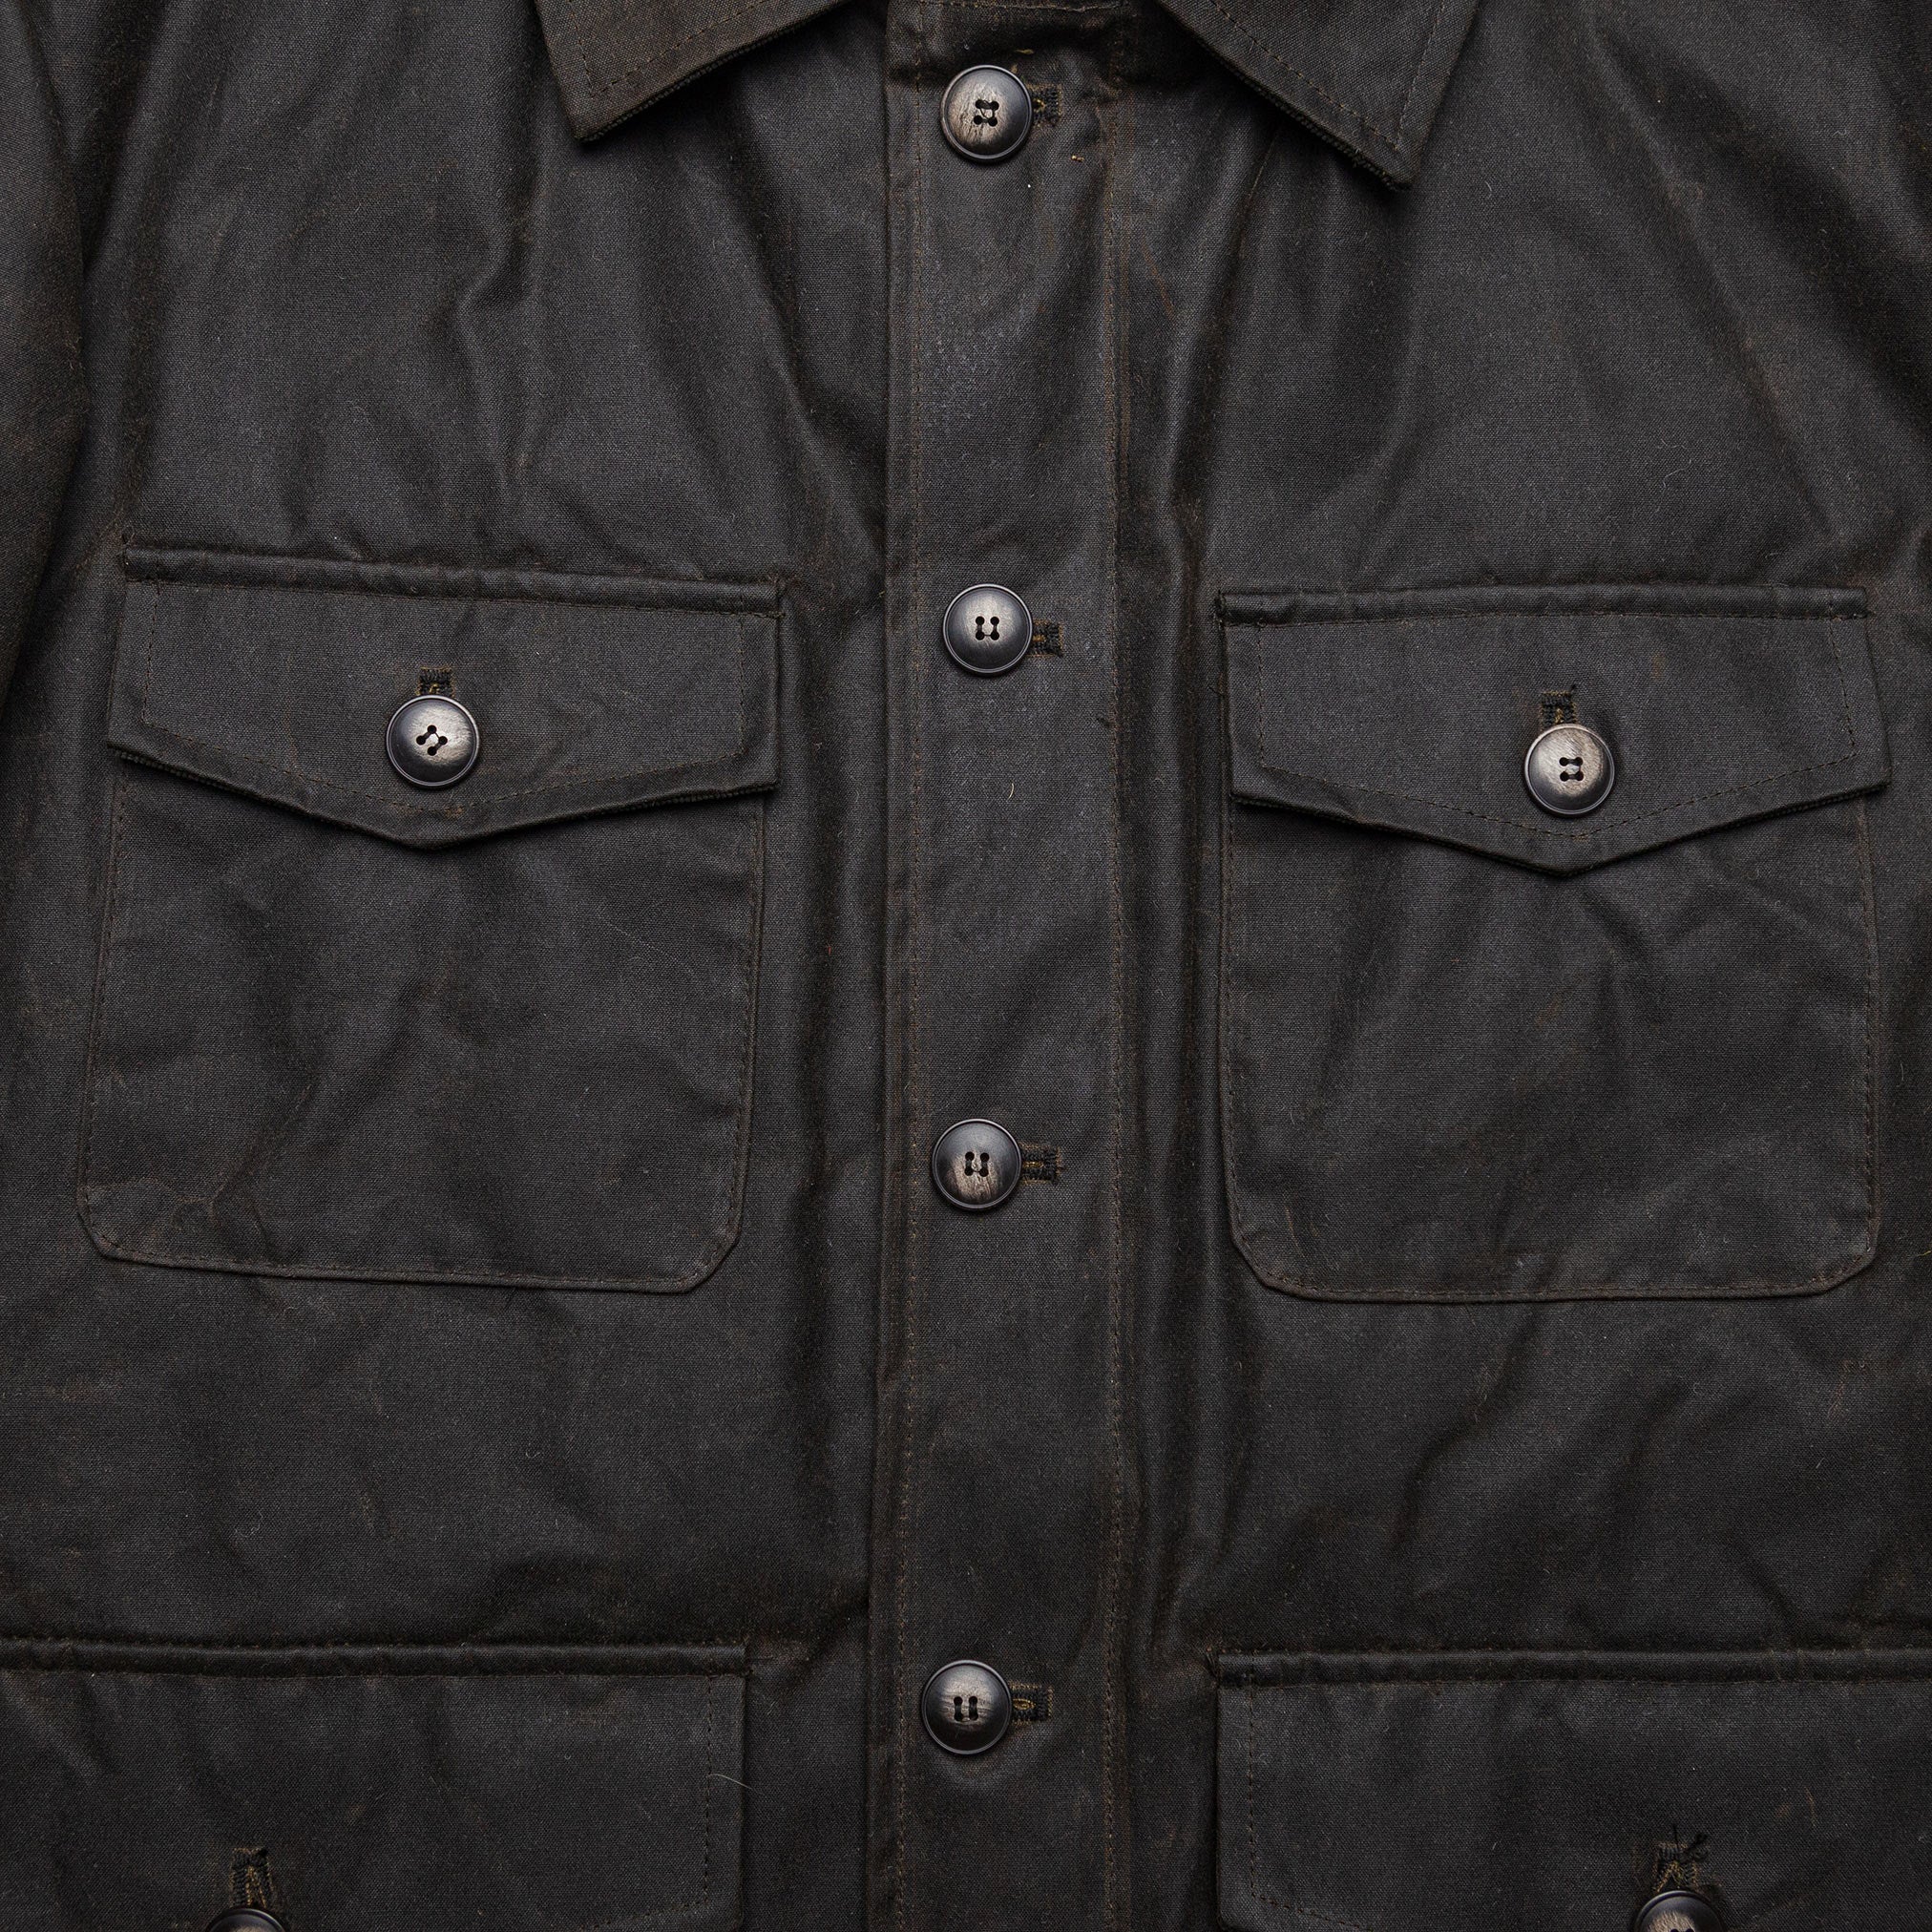 Lined Field Jacket in Waxed Olive